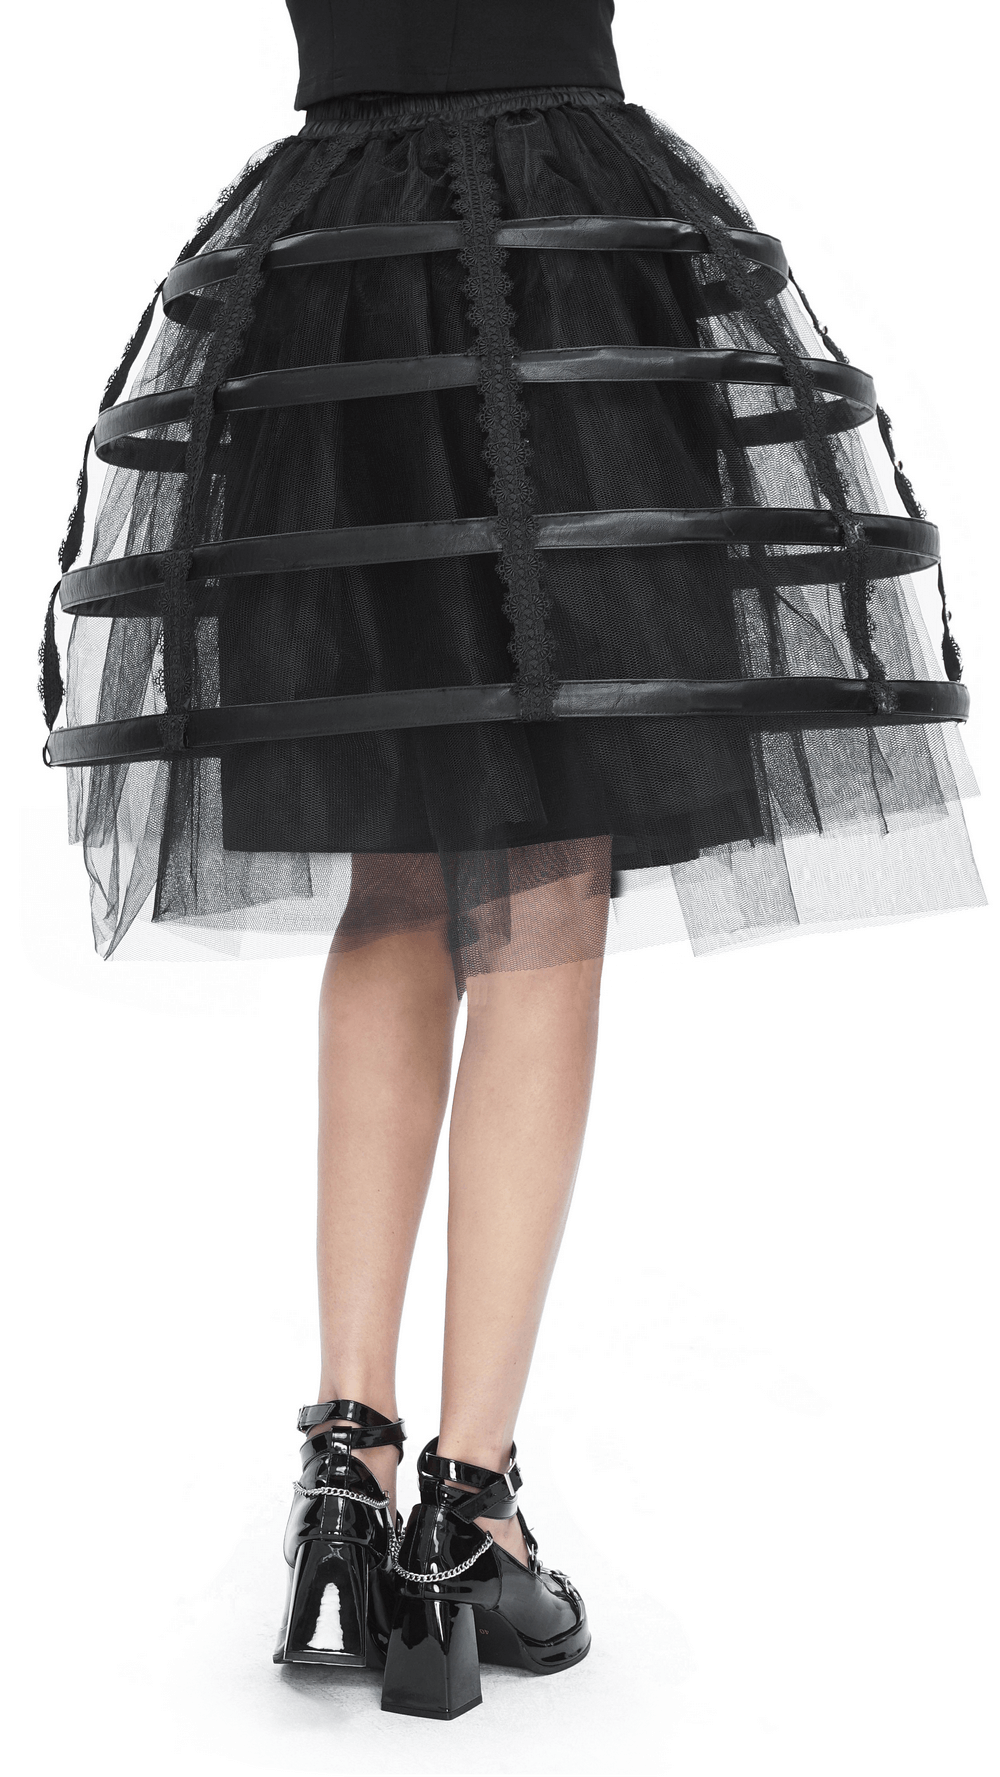 Edgy Women's Black Tulle Skirt with Punk Rock Cage